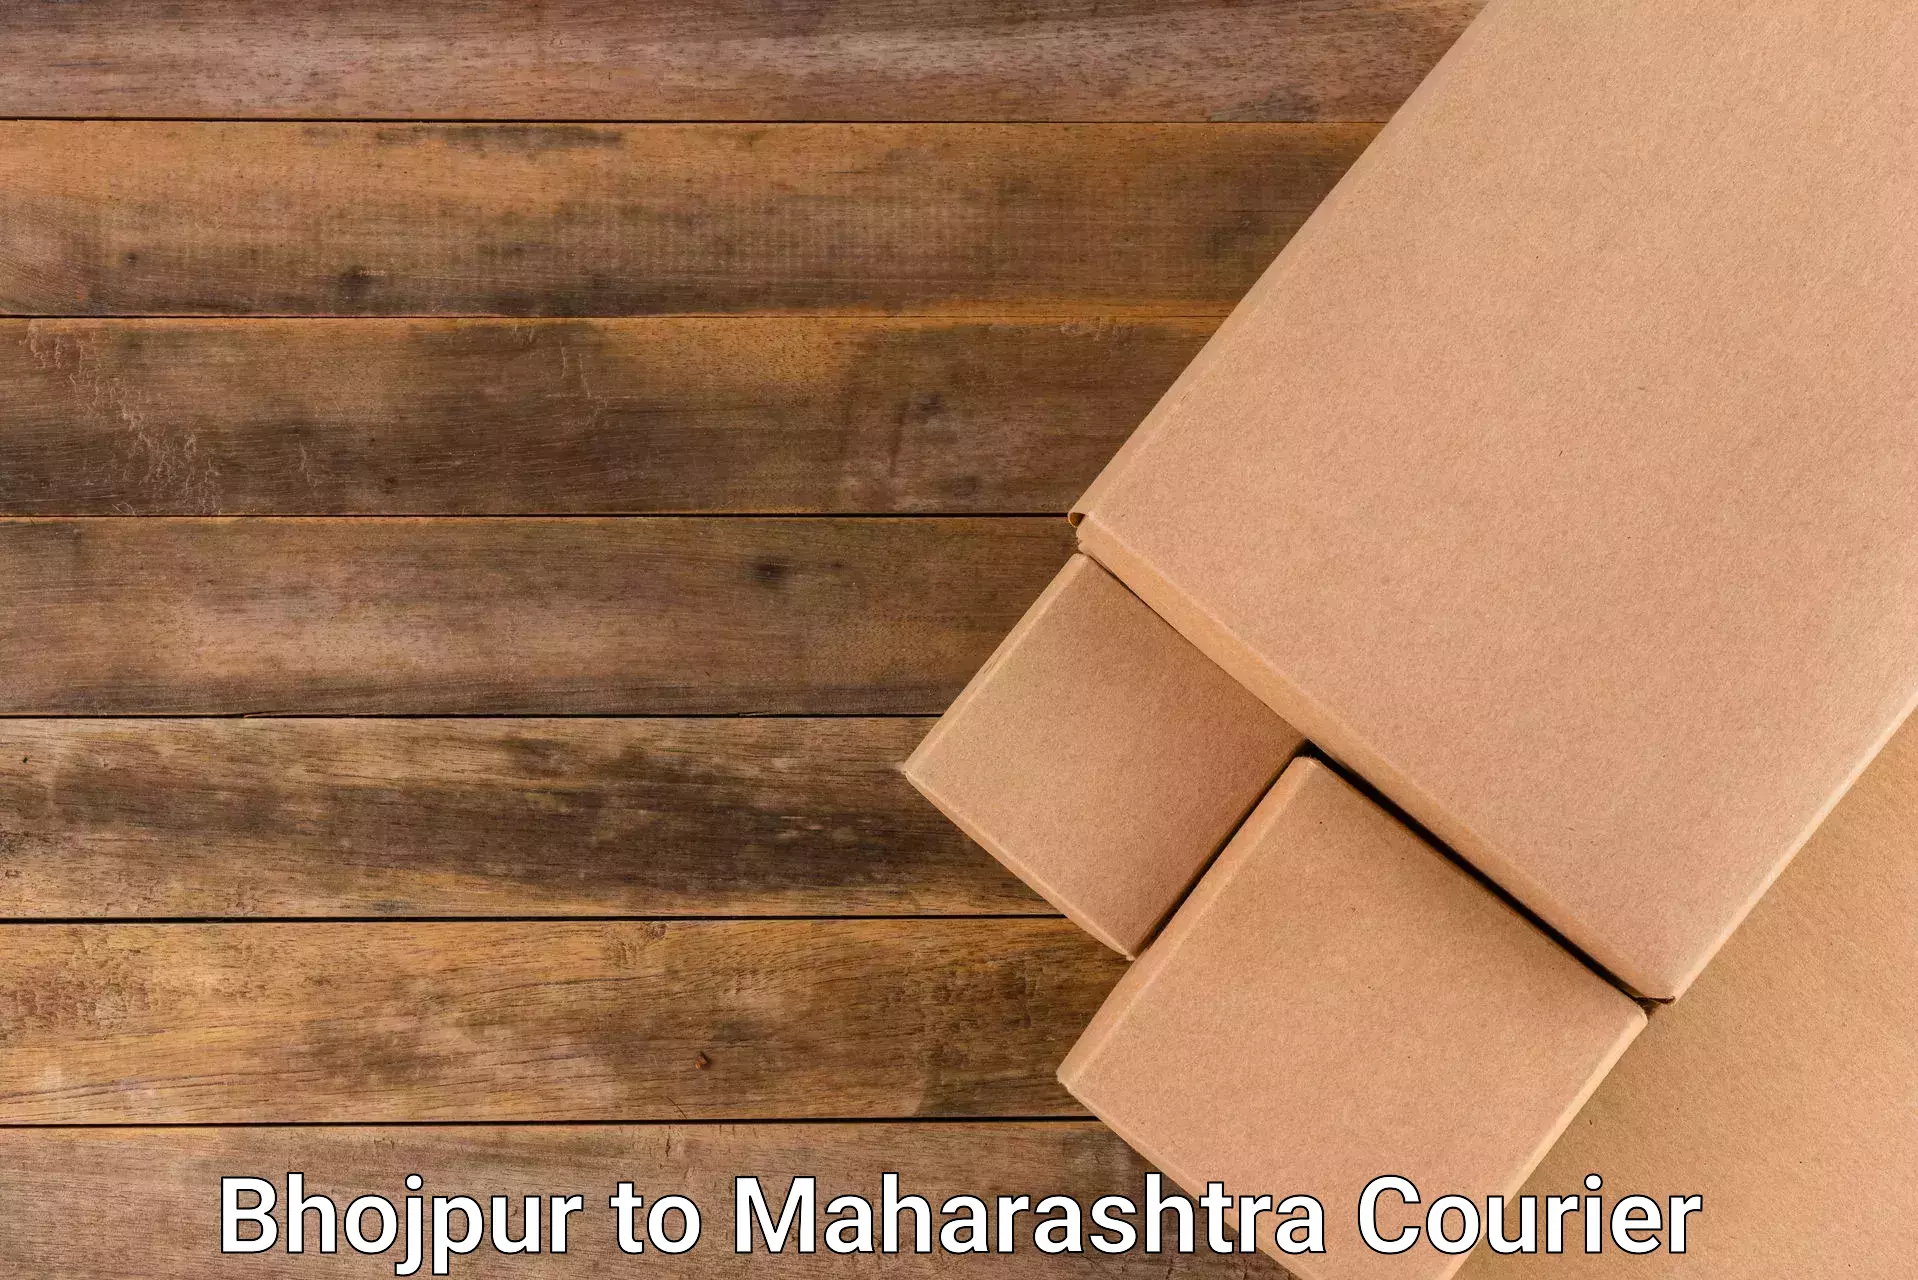 Fast delivery service in Bhojpur to Maharashtra